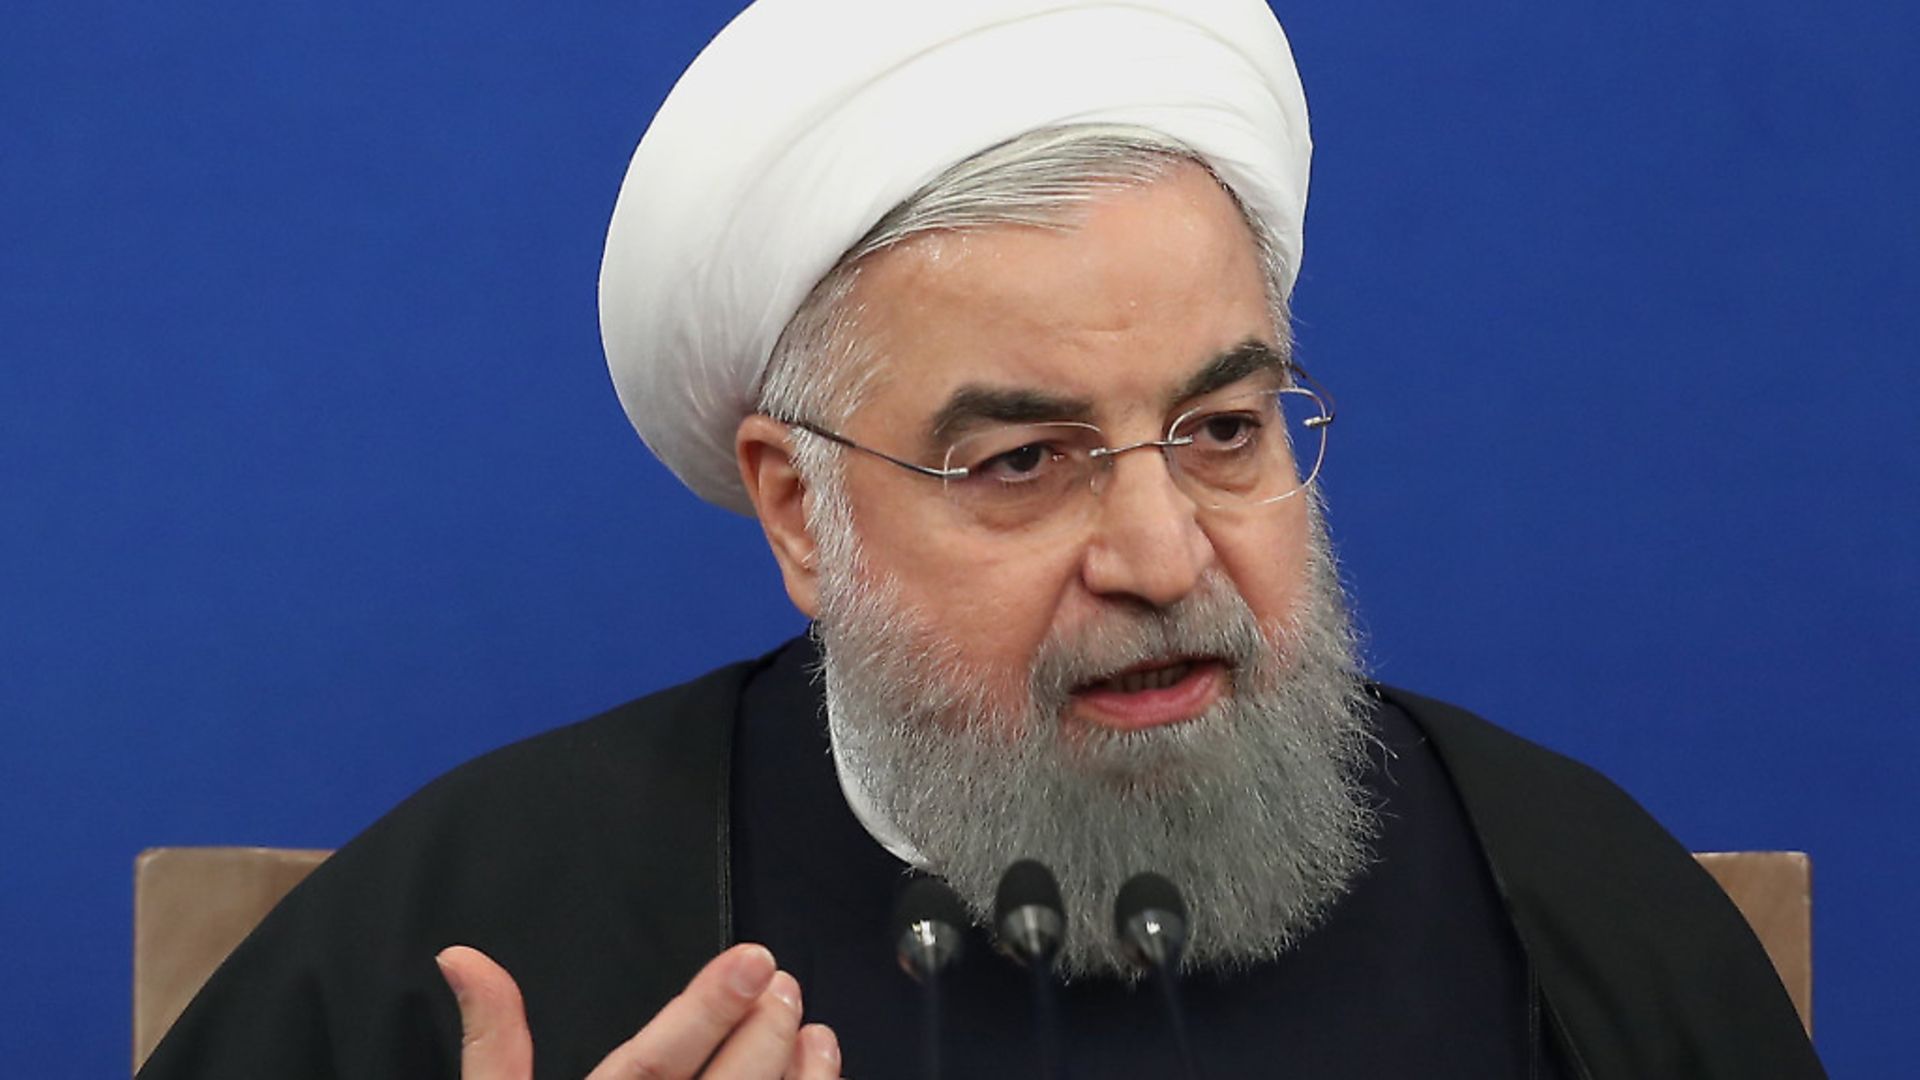 Iranian President Hassan Rouhani said at a recent press conference that the Islamic republic will never renegotiate nuclear deal which it signed with the world powers in 2015. Picture: PA - Credit: Xinhua News Agency/PA Images